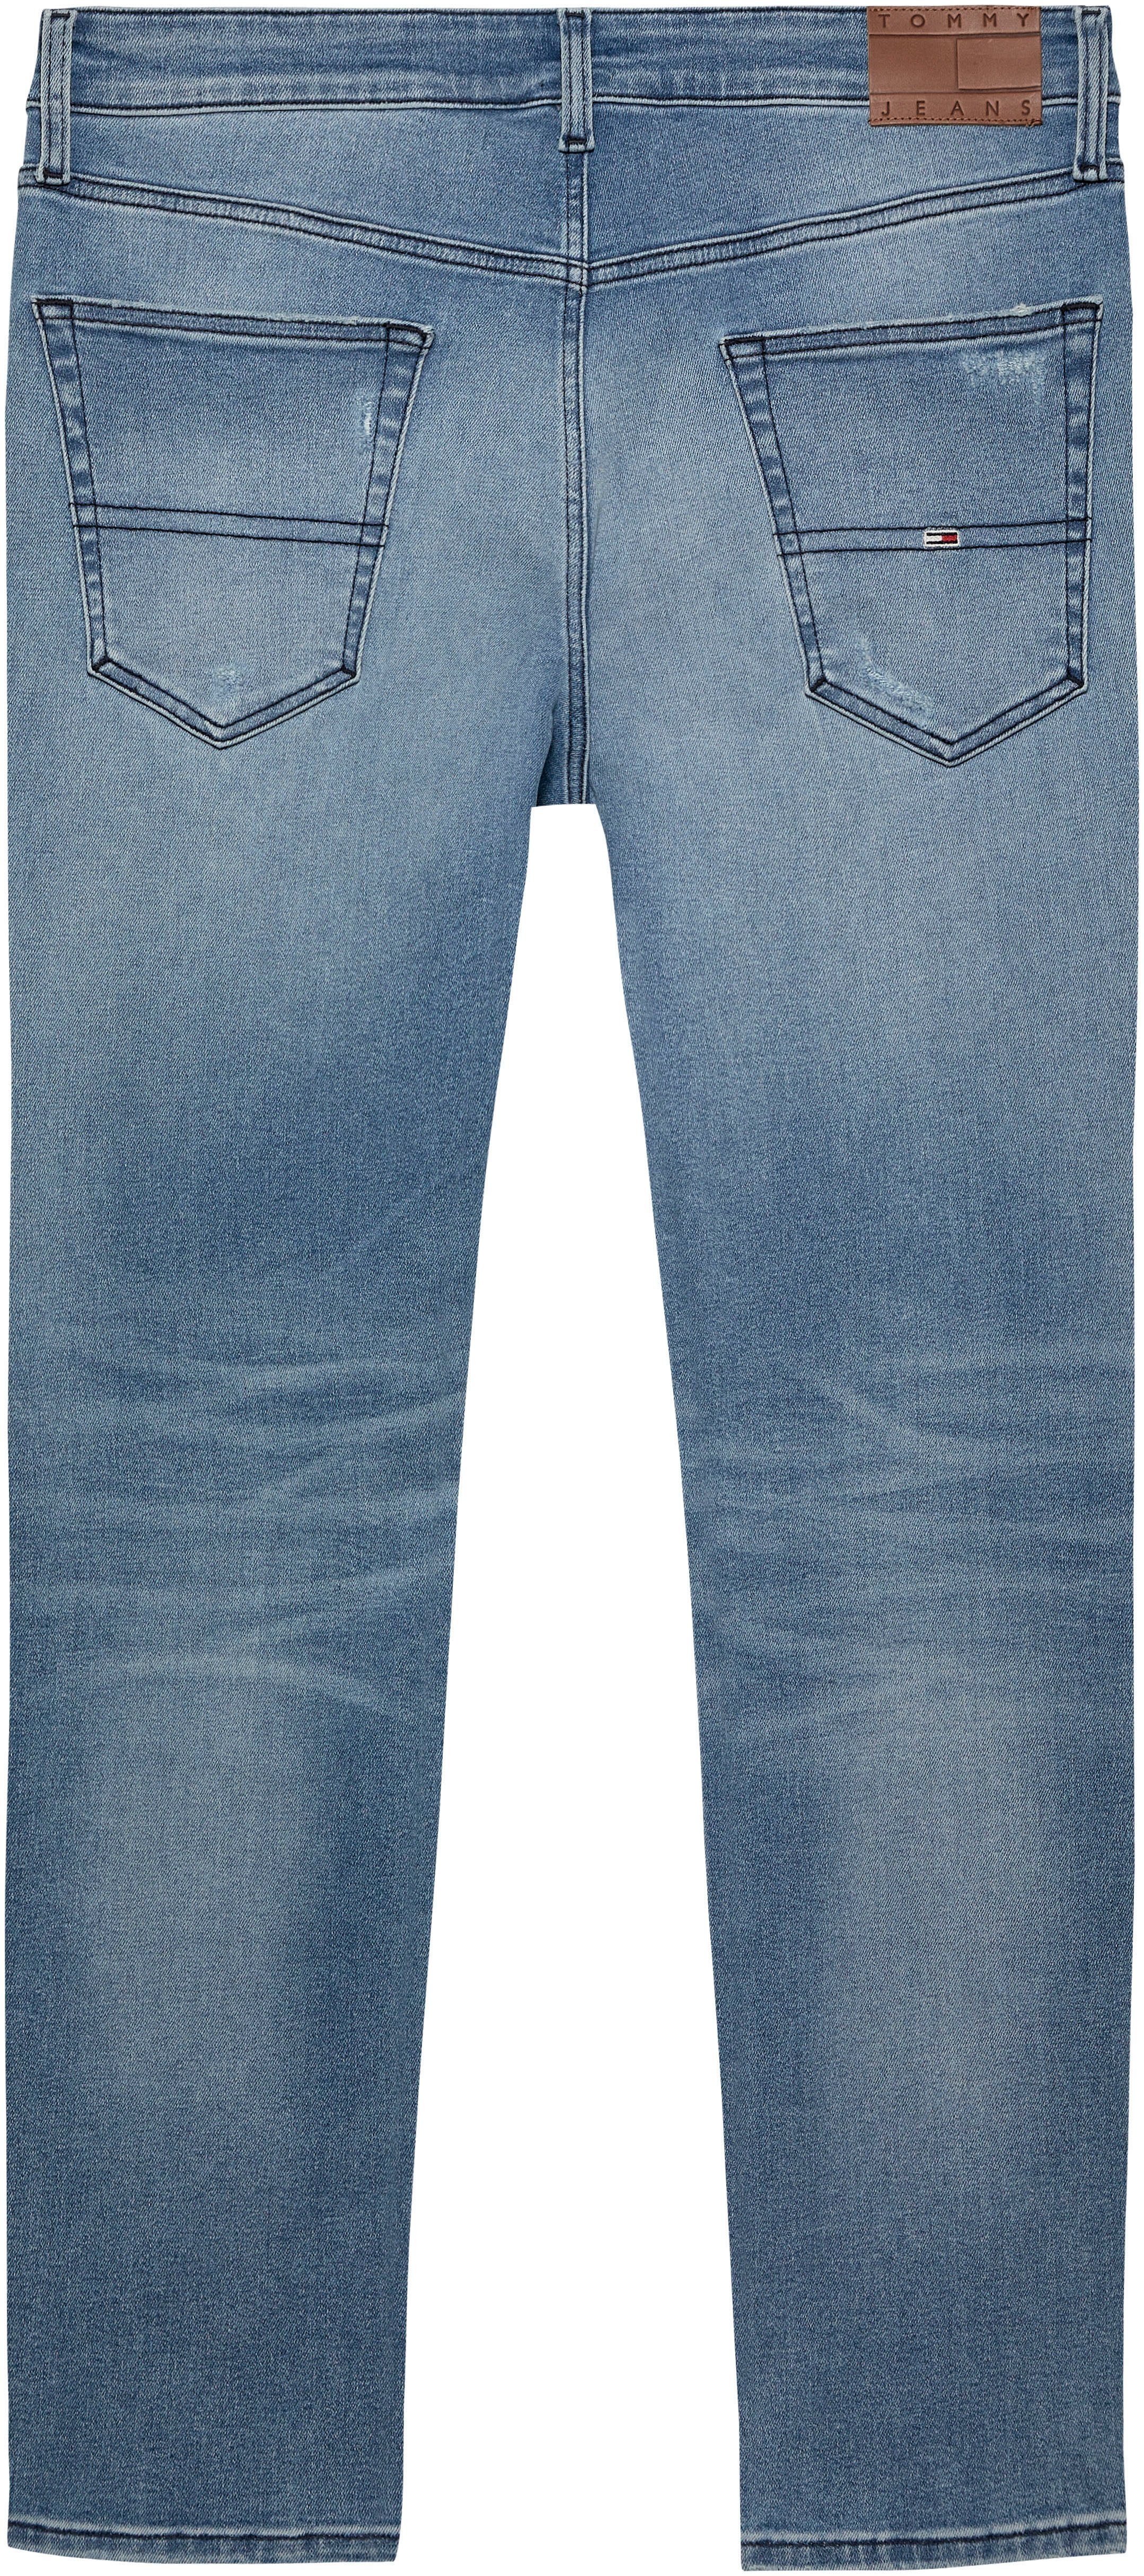 TOMMY JEANS Tapered jeans AUSTIN SLIM TPRD